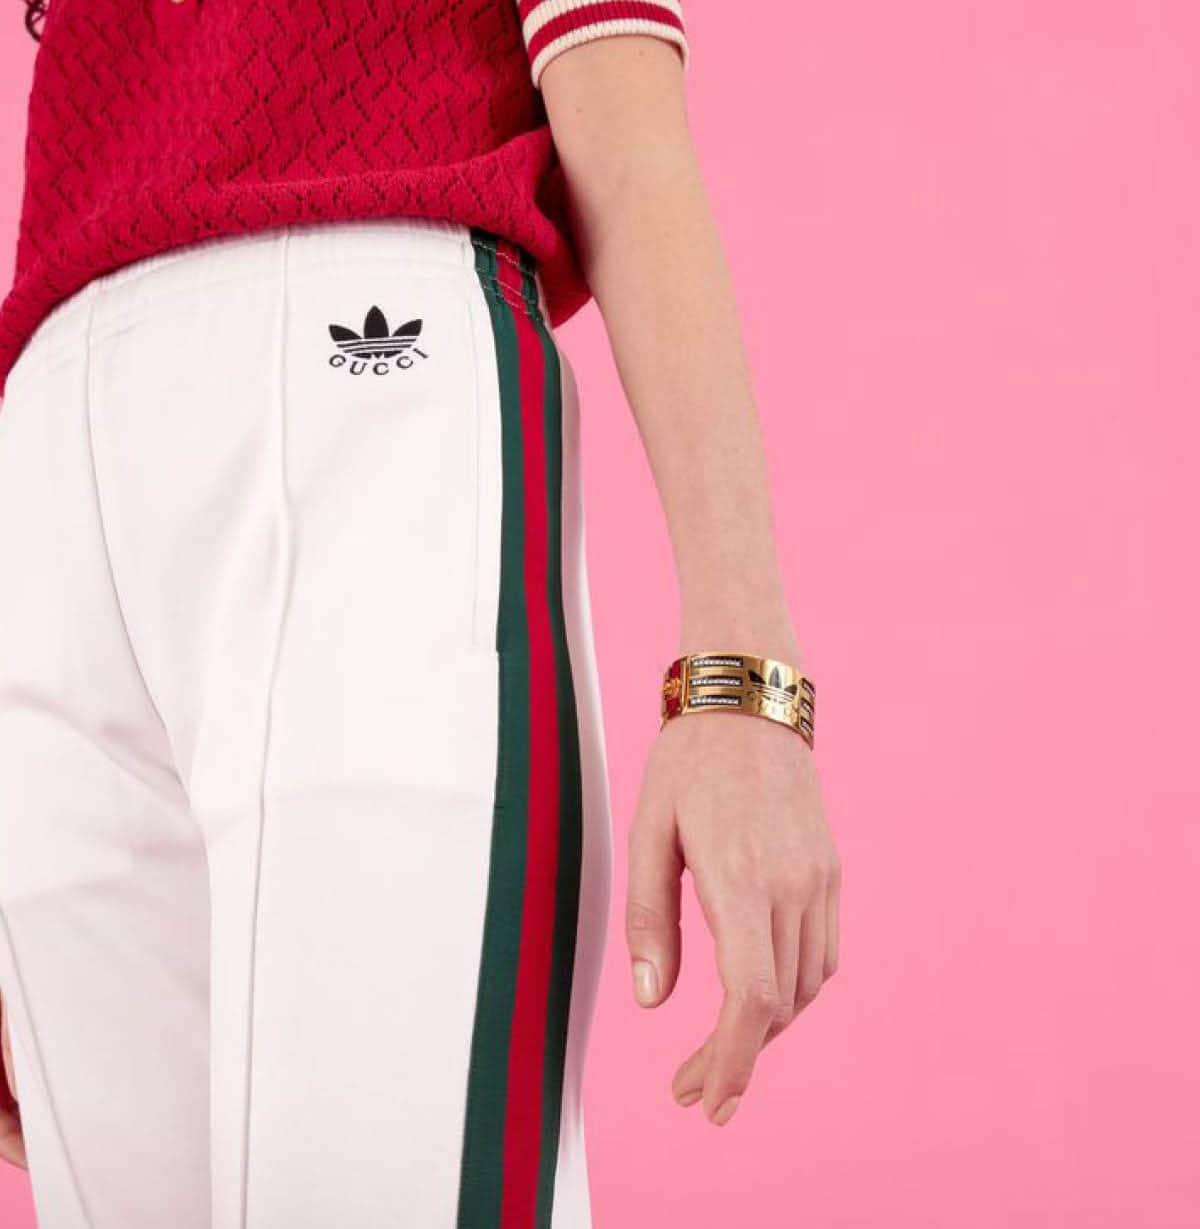 https://houseofhipsters.com/wp-content/uploads/2022/11/holiday-gift-guide-for-her-gucci-addidas.jpg